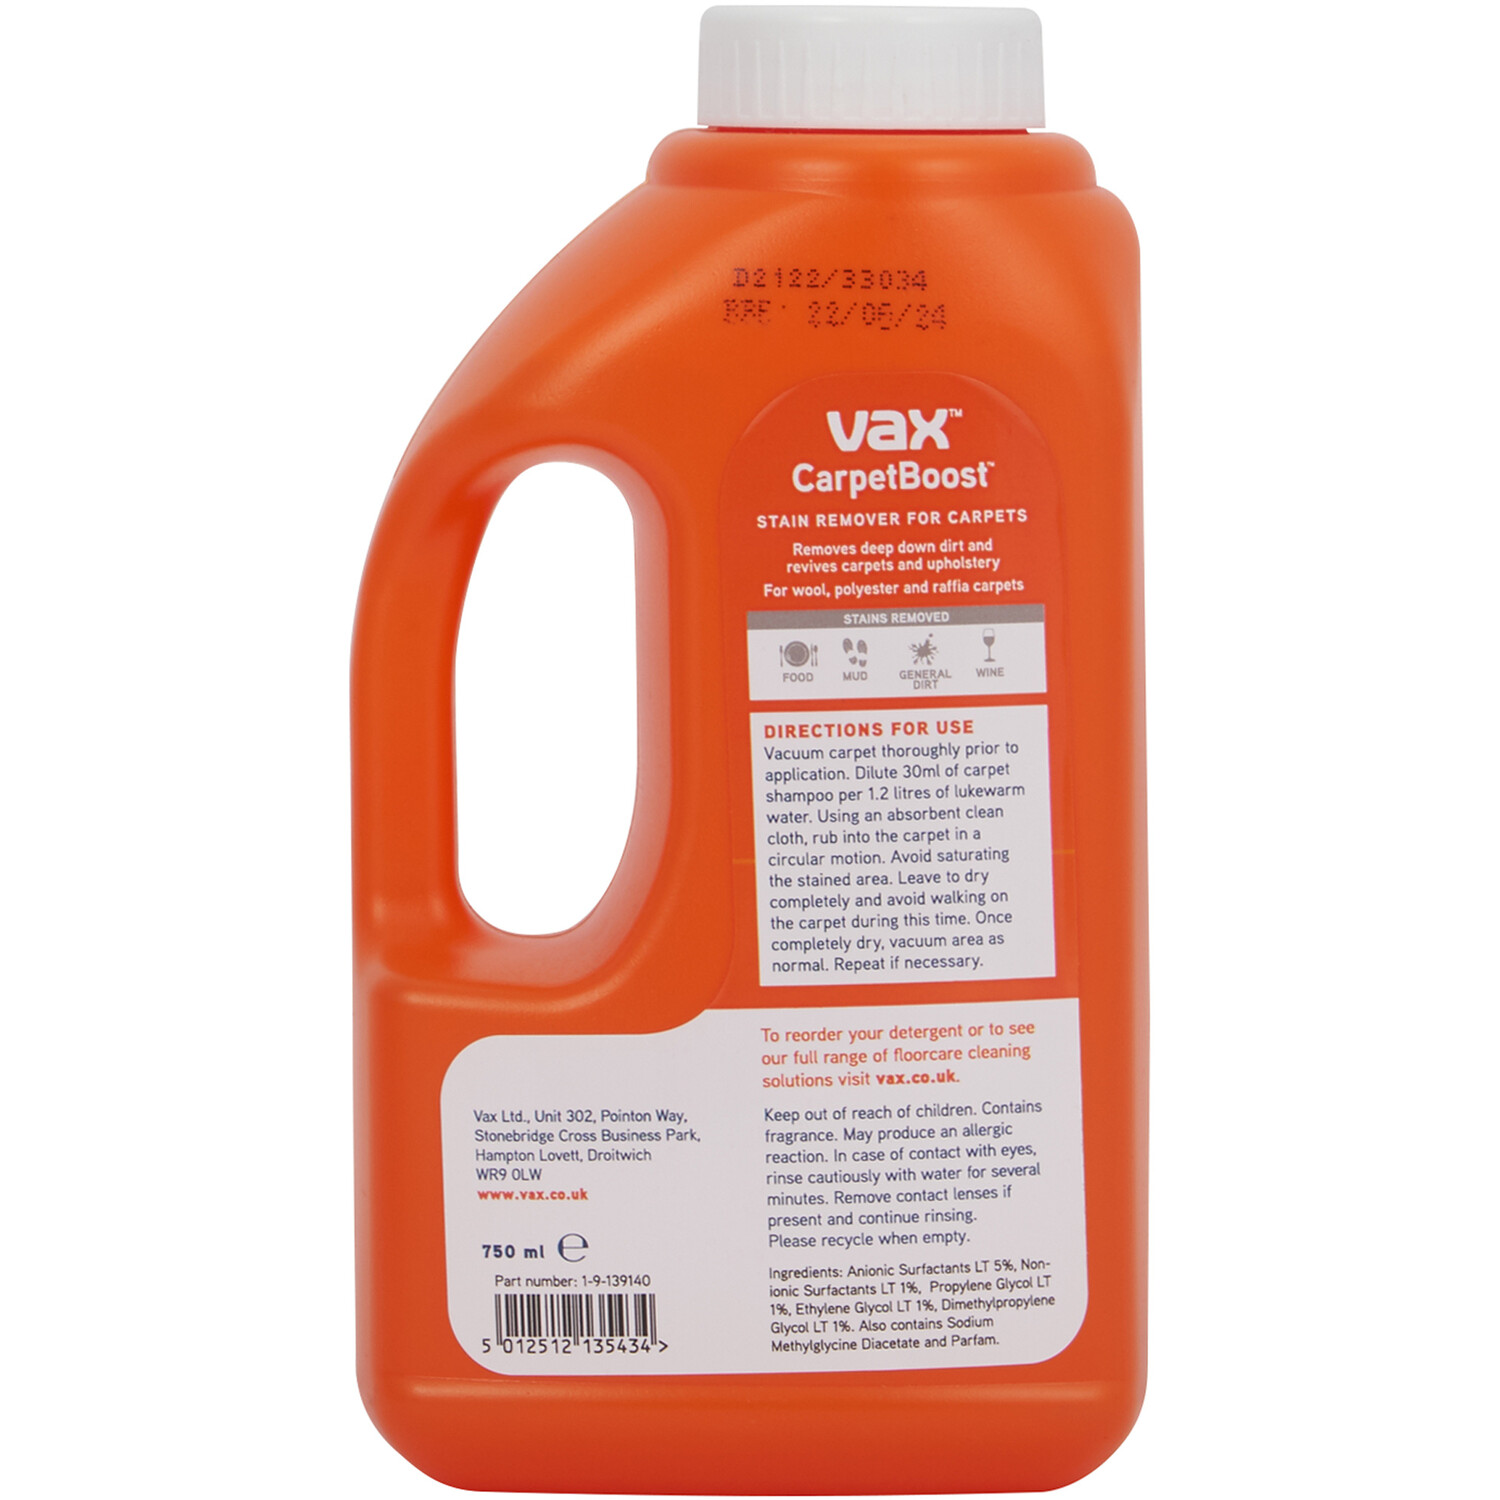 Vax CarpetBoost Stain Remover Image 2